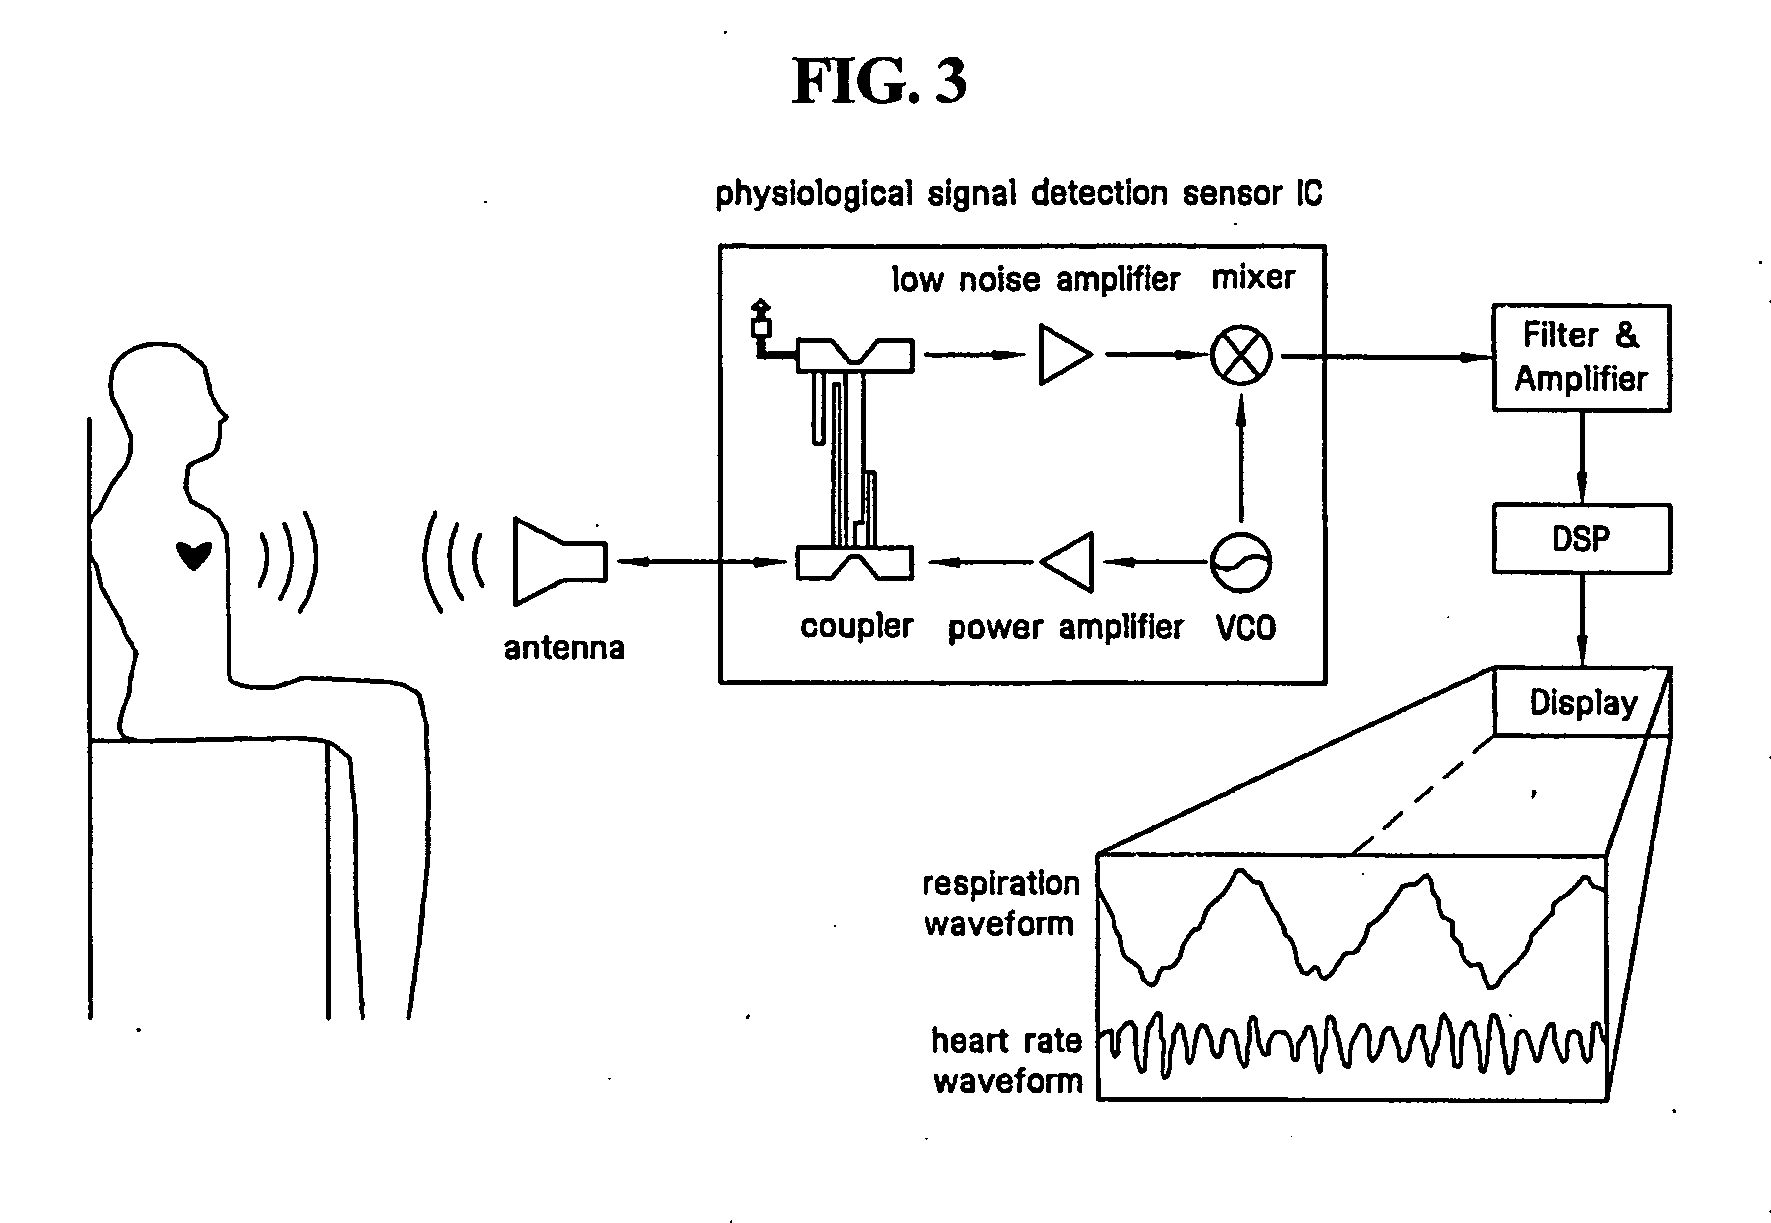 Apparatus and/or method for inducing sound sleep and waking